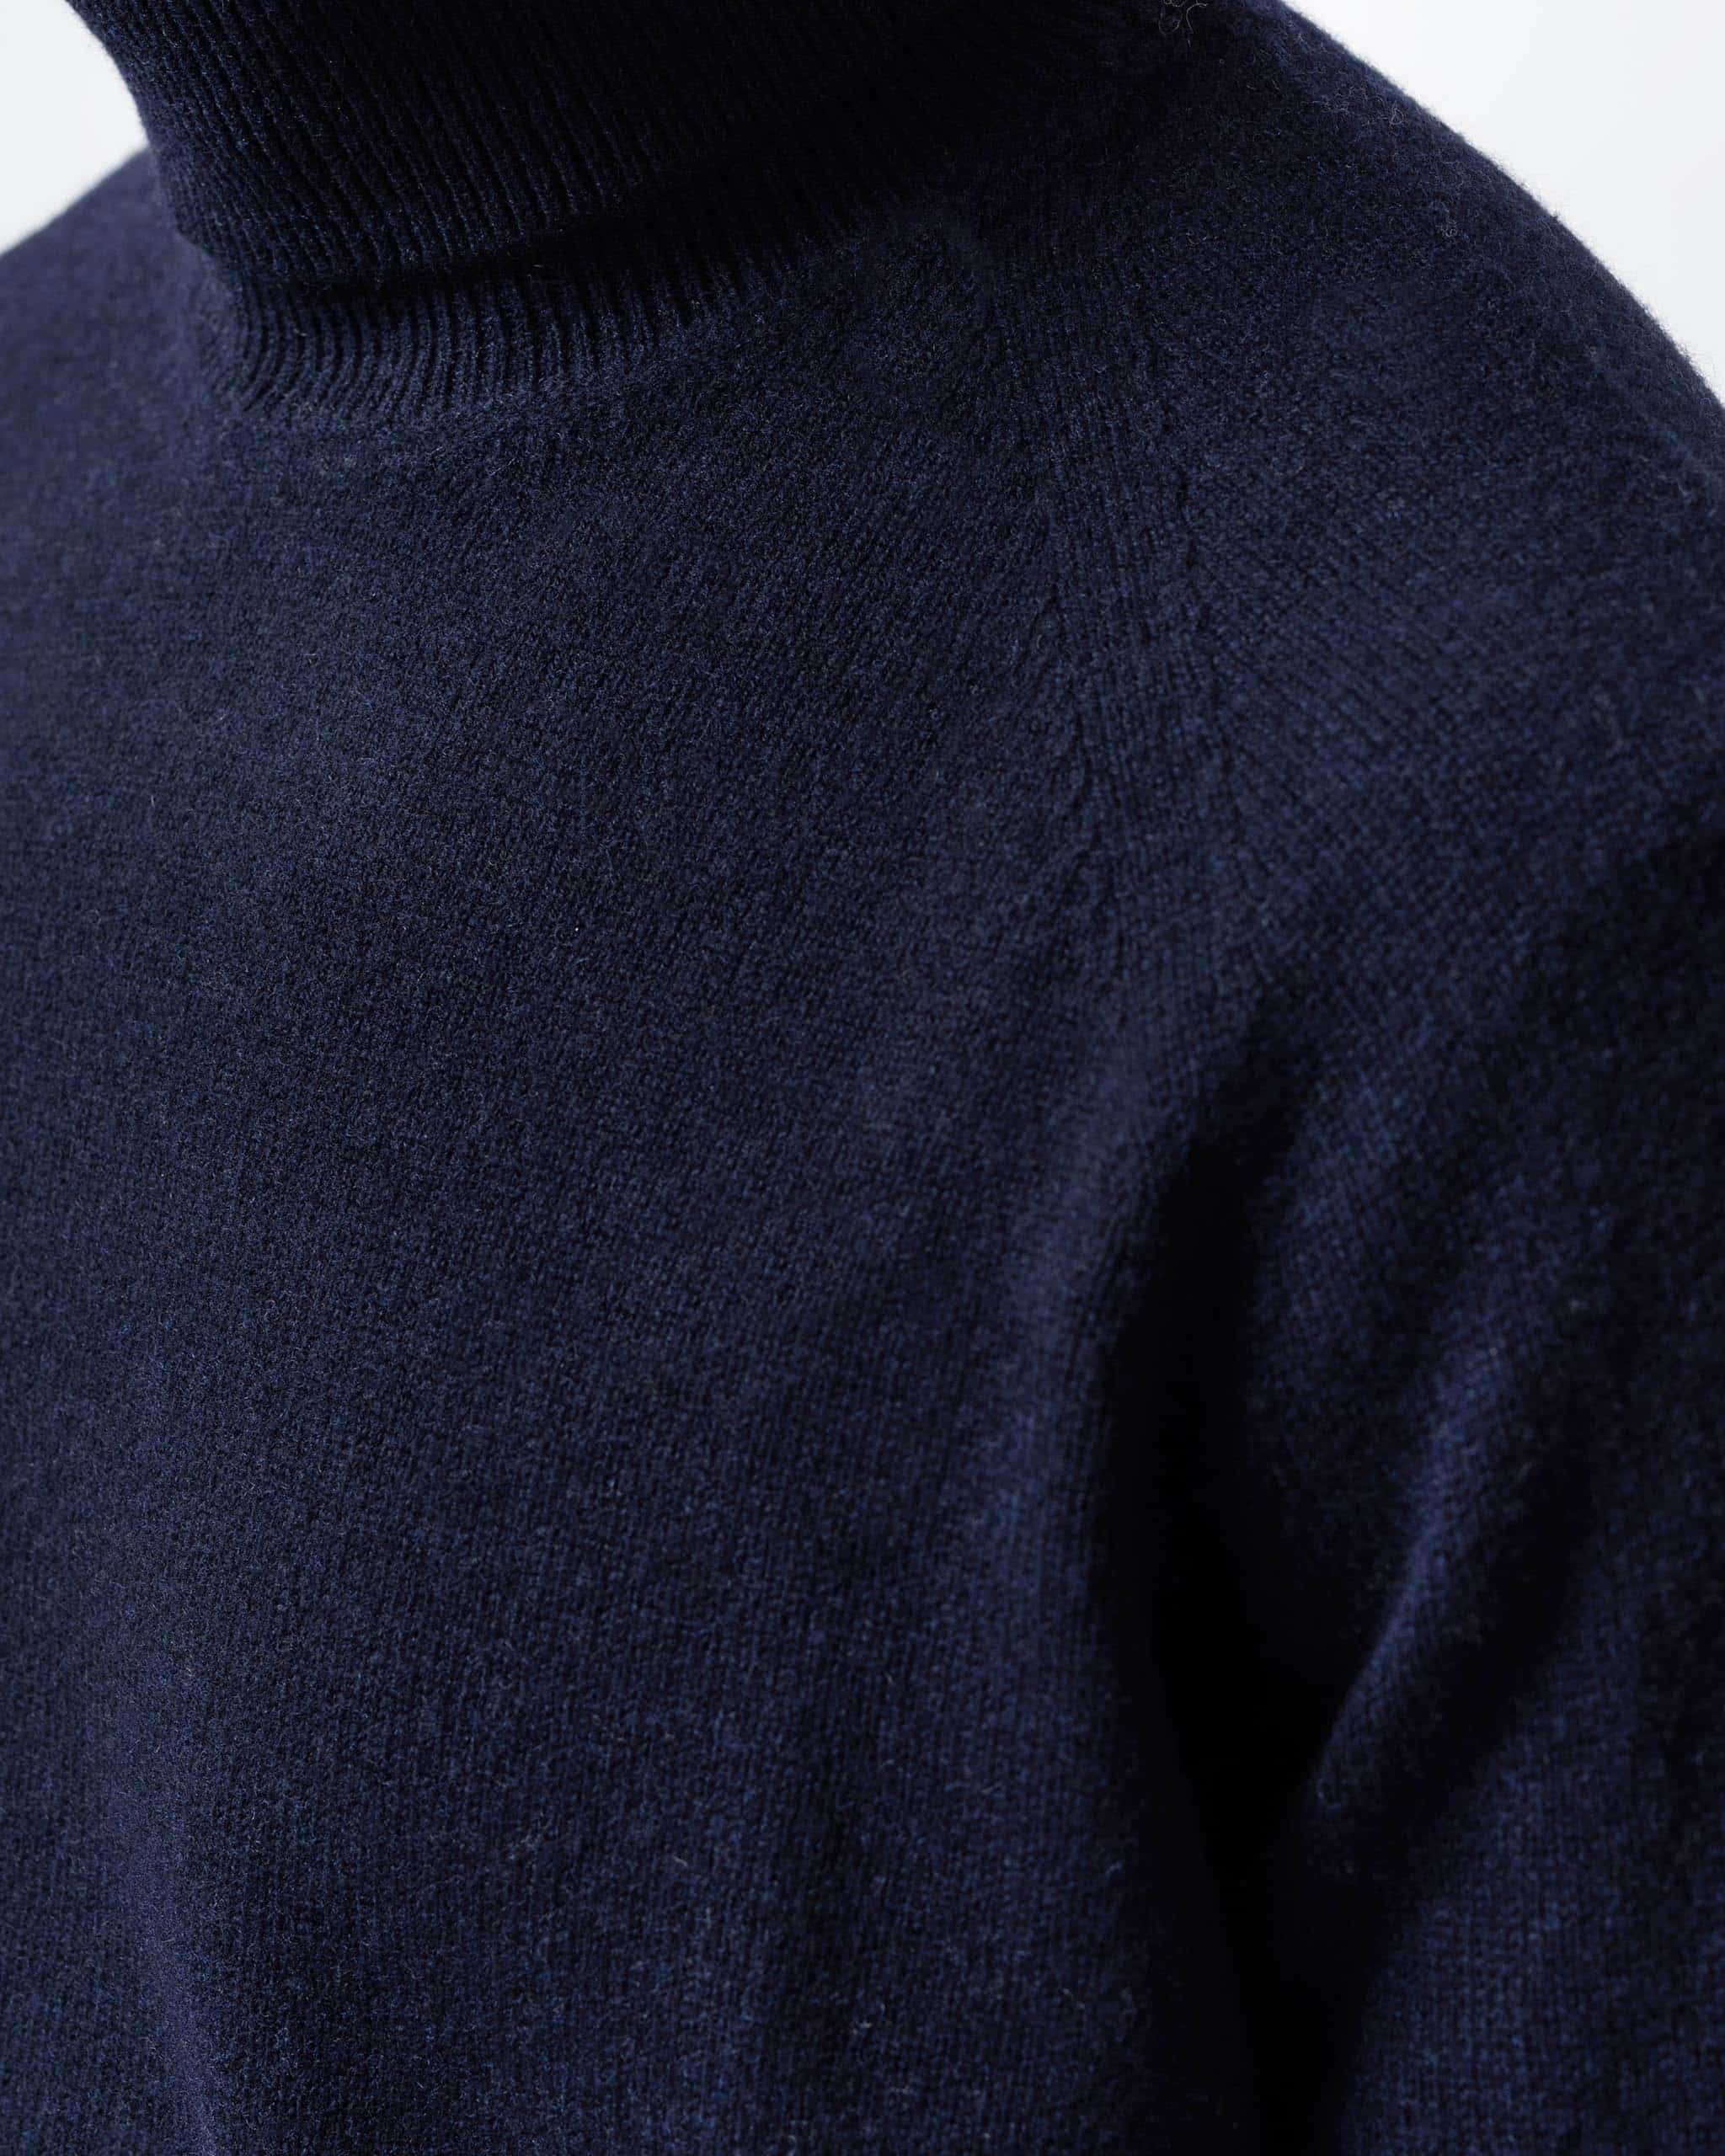 Wool cashmere roll neck midnight blue image 5